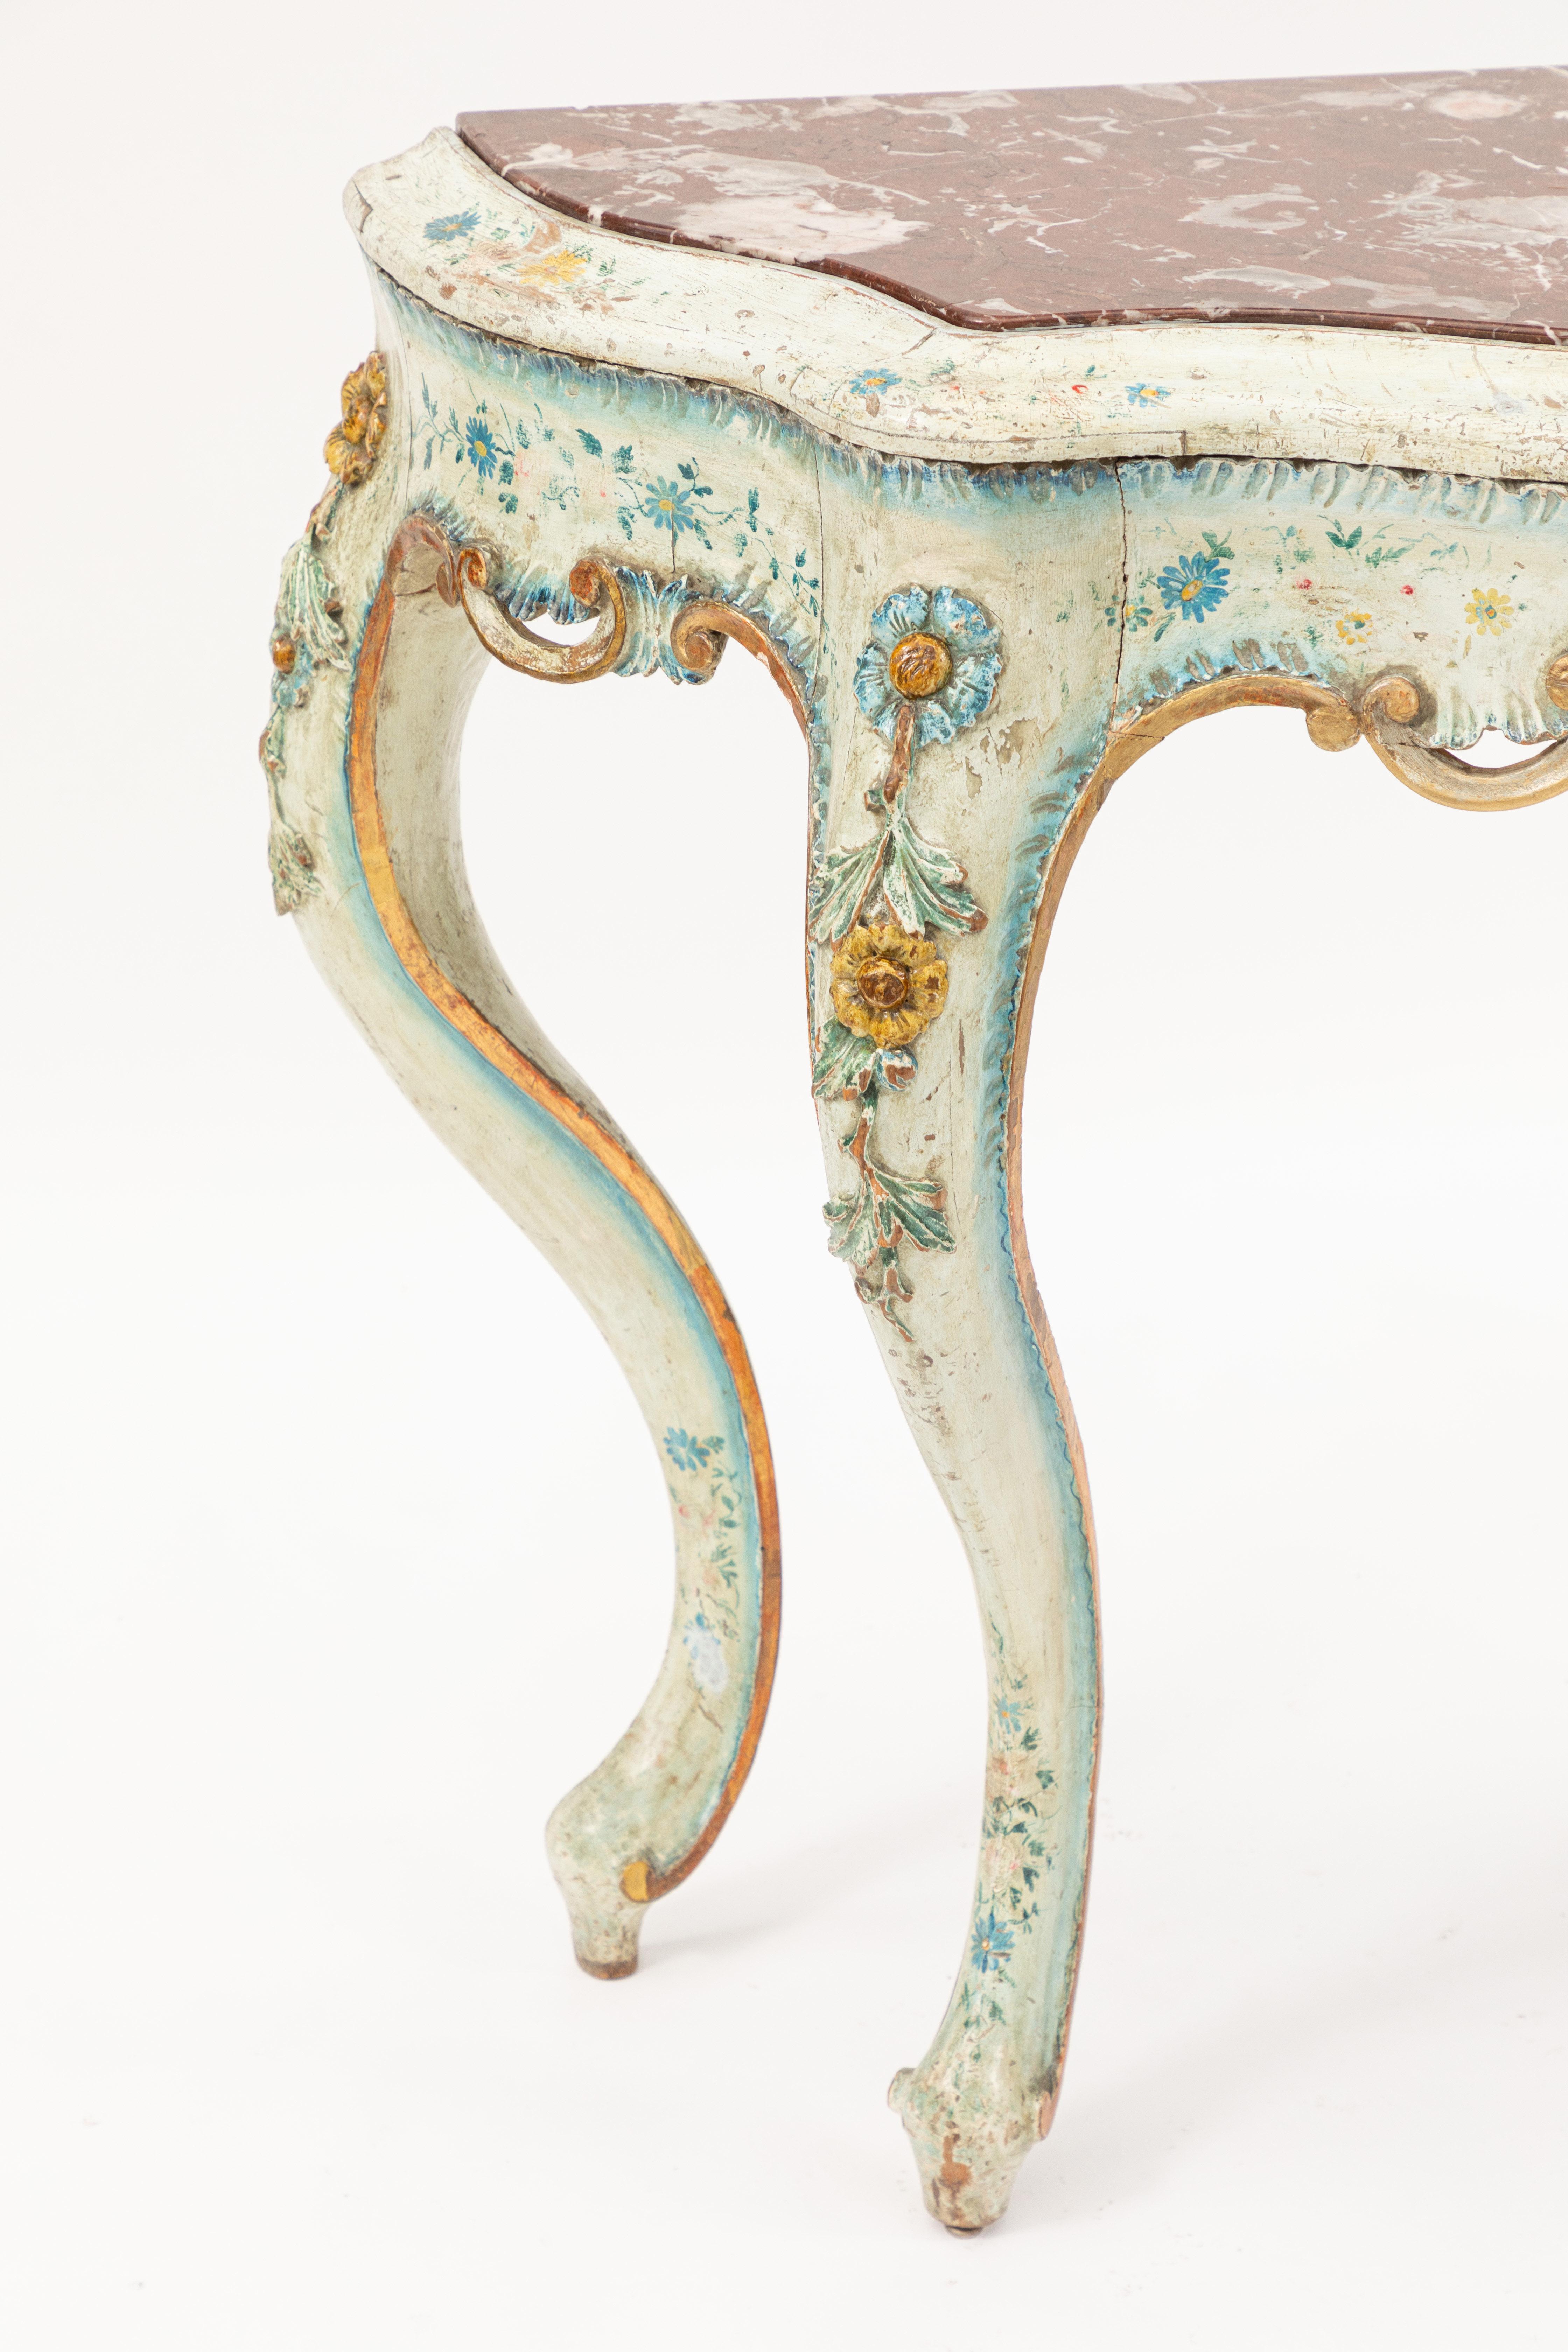 Early to mid-19th century blue and white painted Venetian console with rouge marble topped handprinted flower detail.